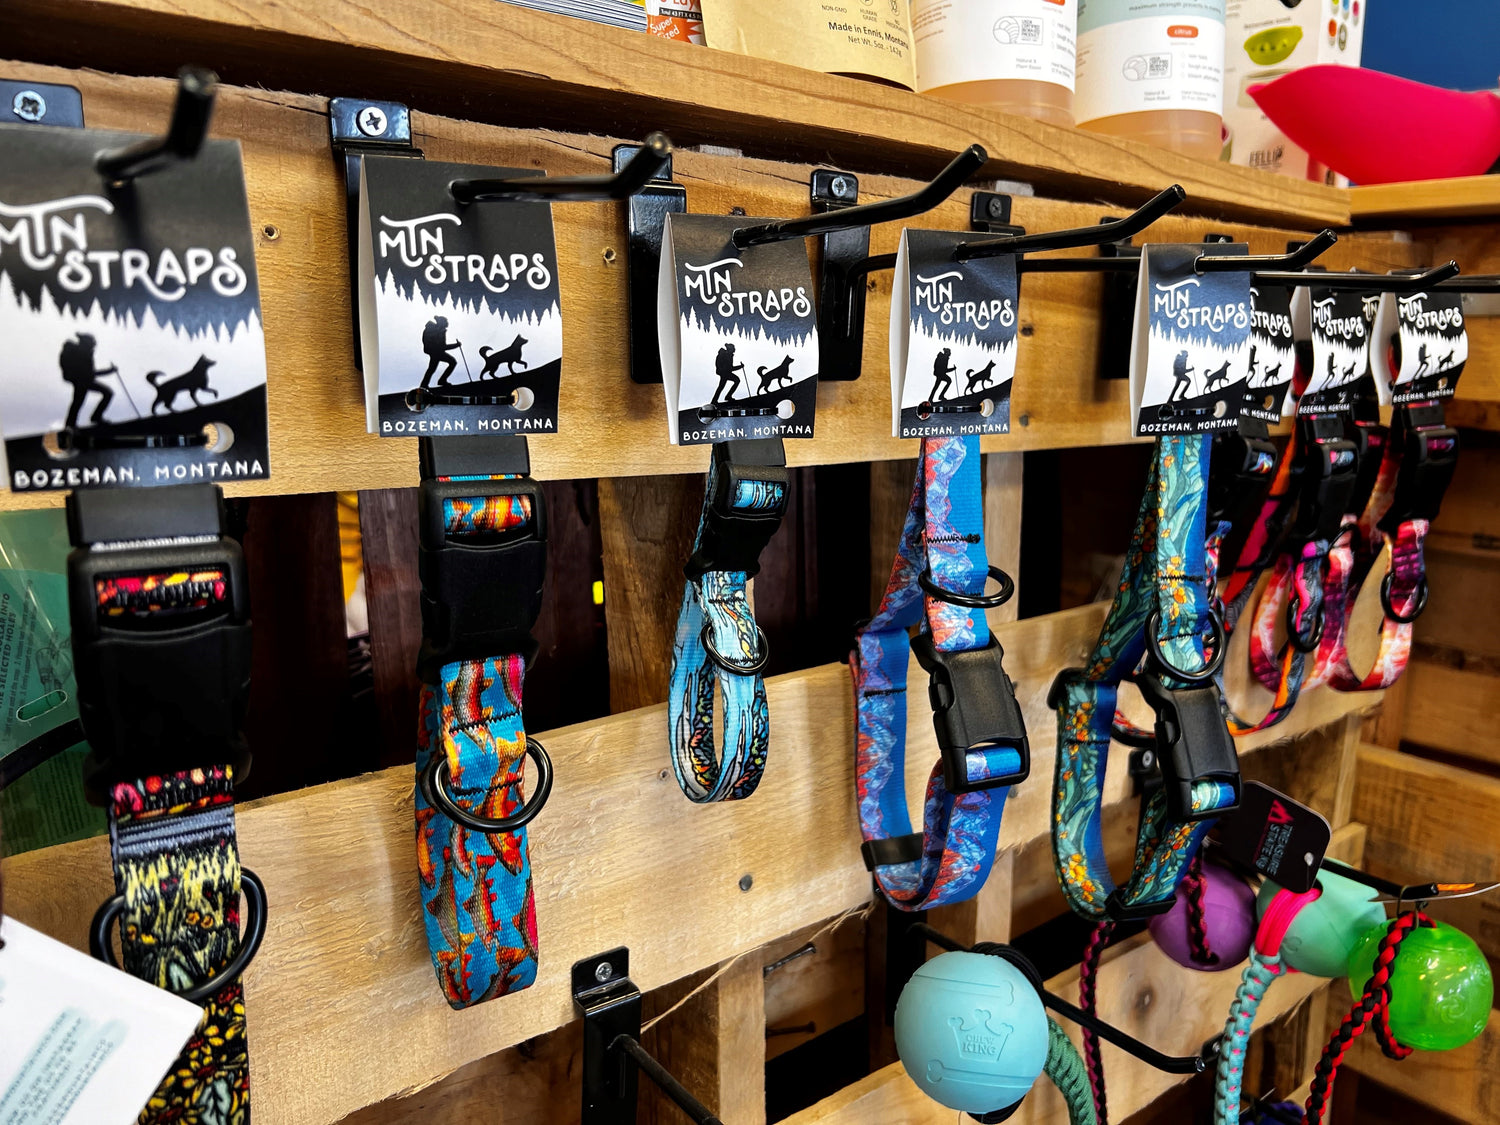 Mtn Straps Collars - Made in MT